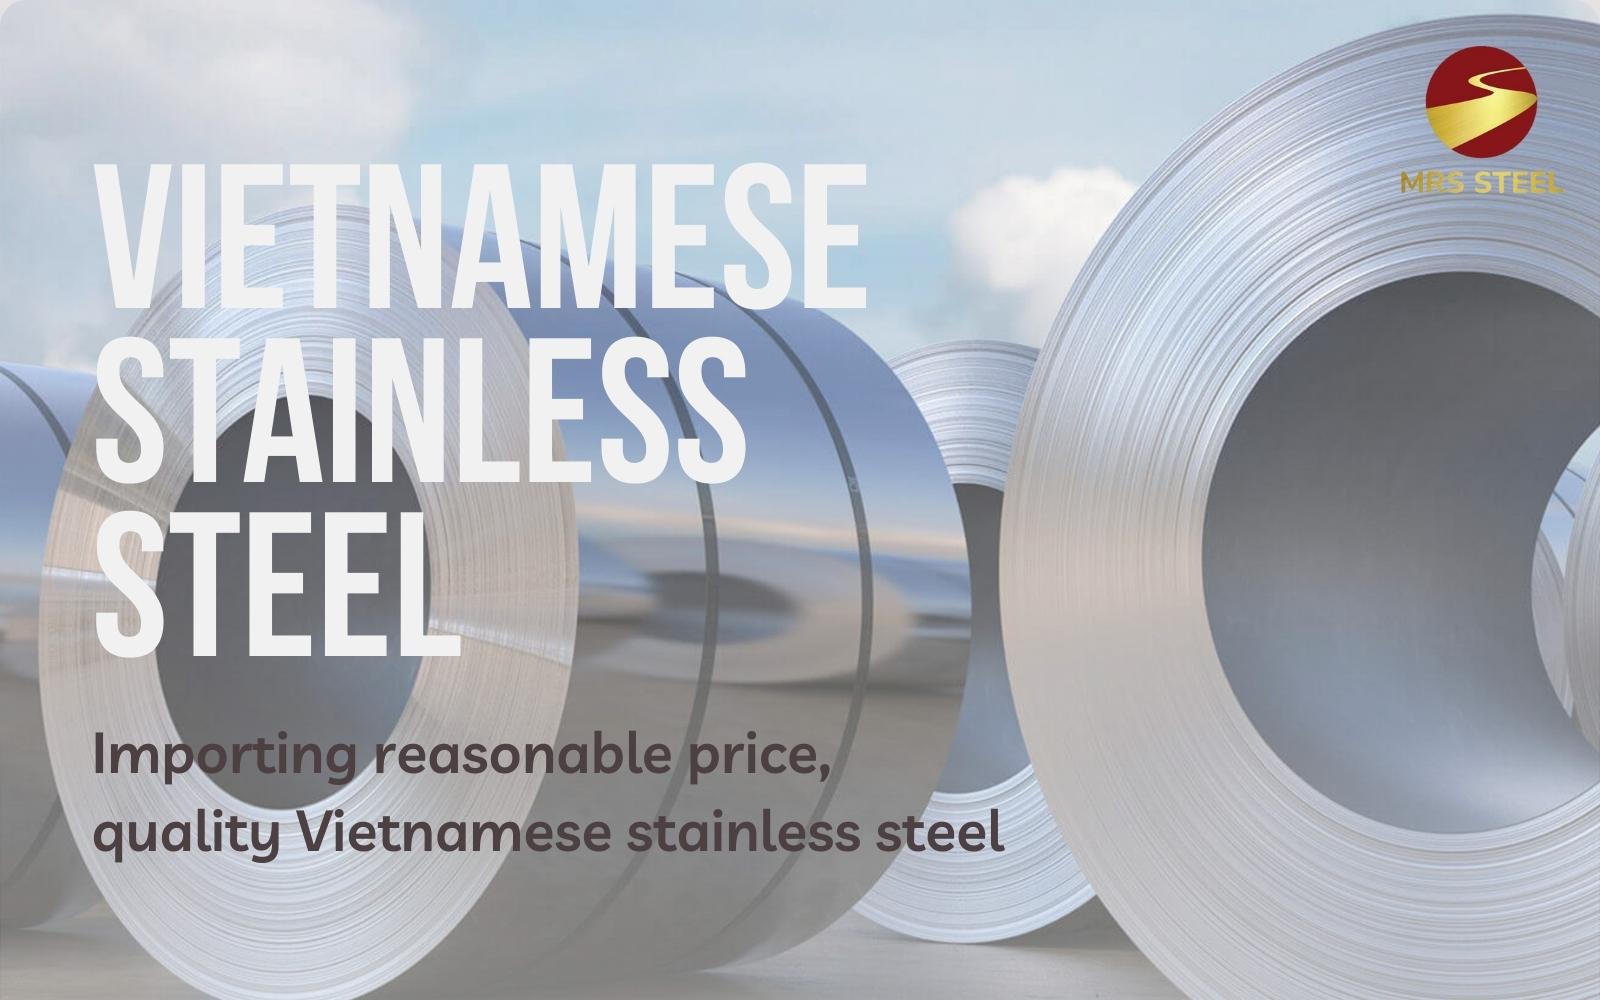 Importing reasonable price, quality stainless steel from Vietnam